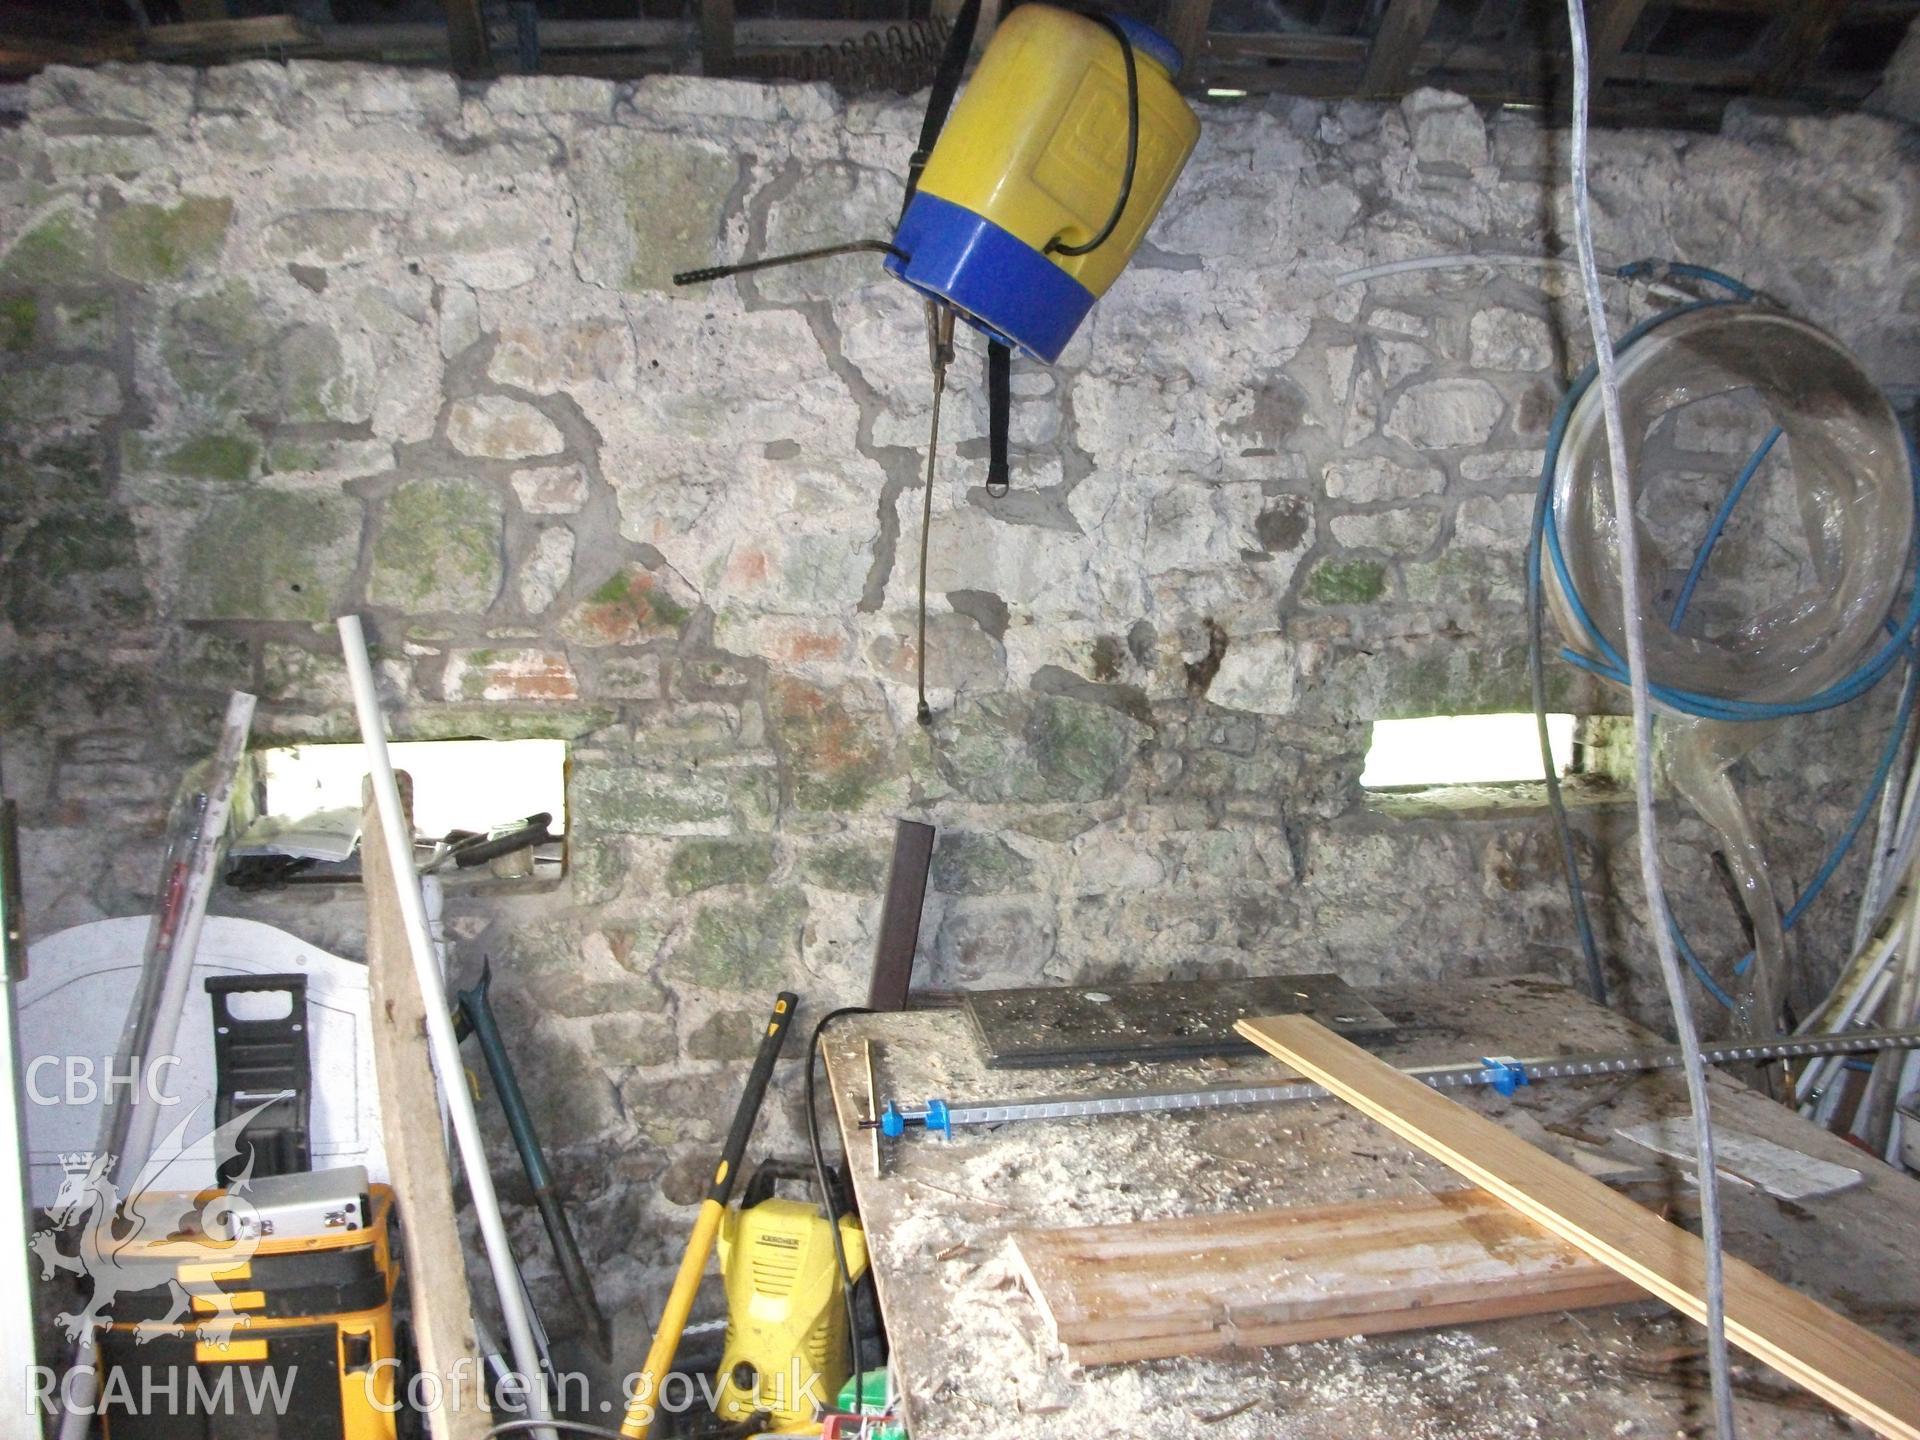 Photograph showing detailed view of the interior of the building attached to the cottage at Pant-y-Castell, Maesybont. Photographed by Mark Waghorn to meet a condition attached to planning application.